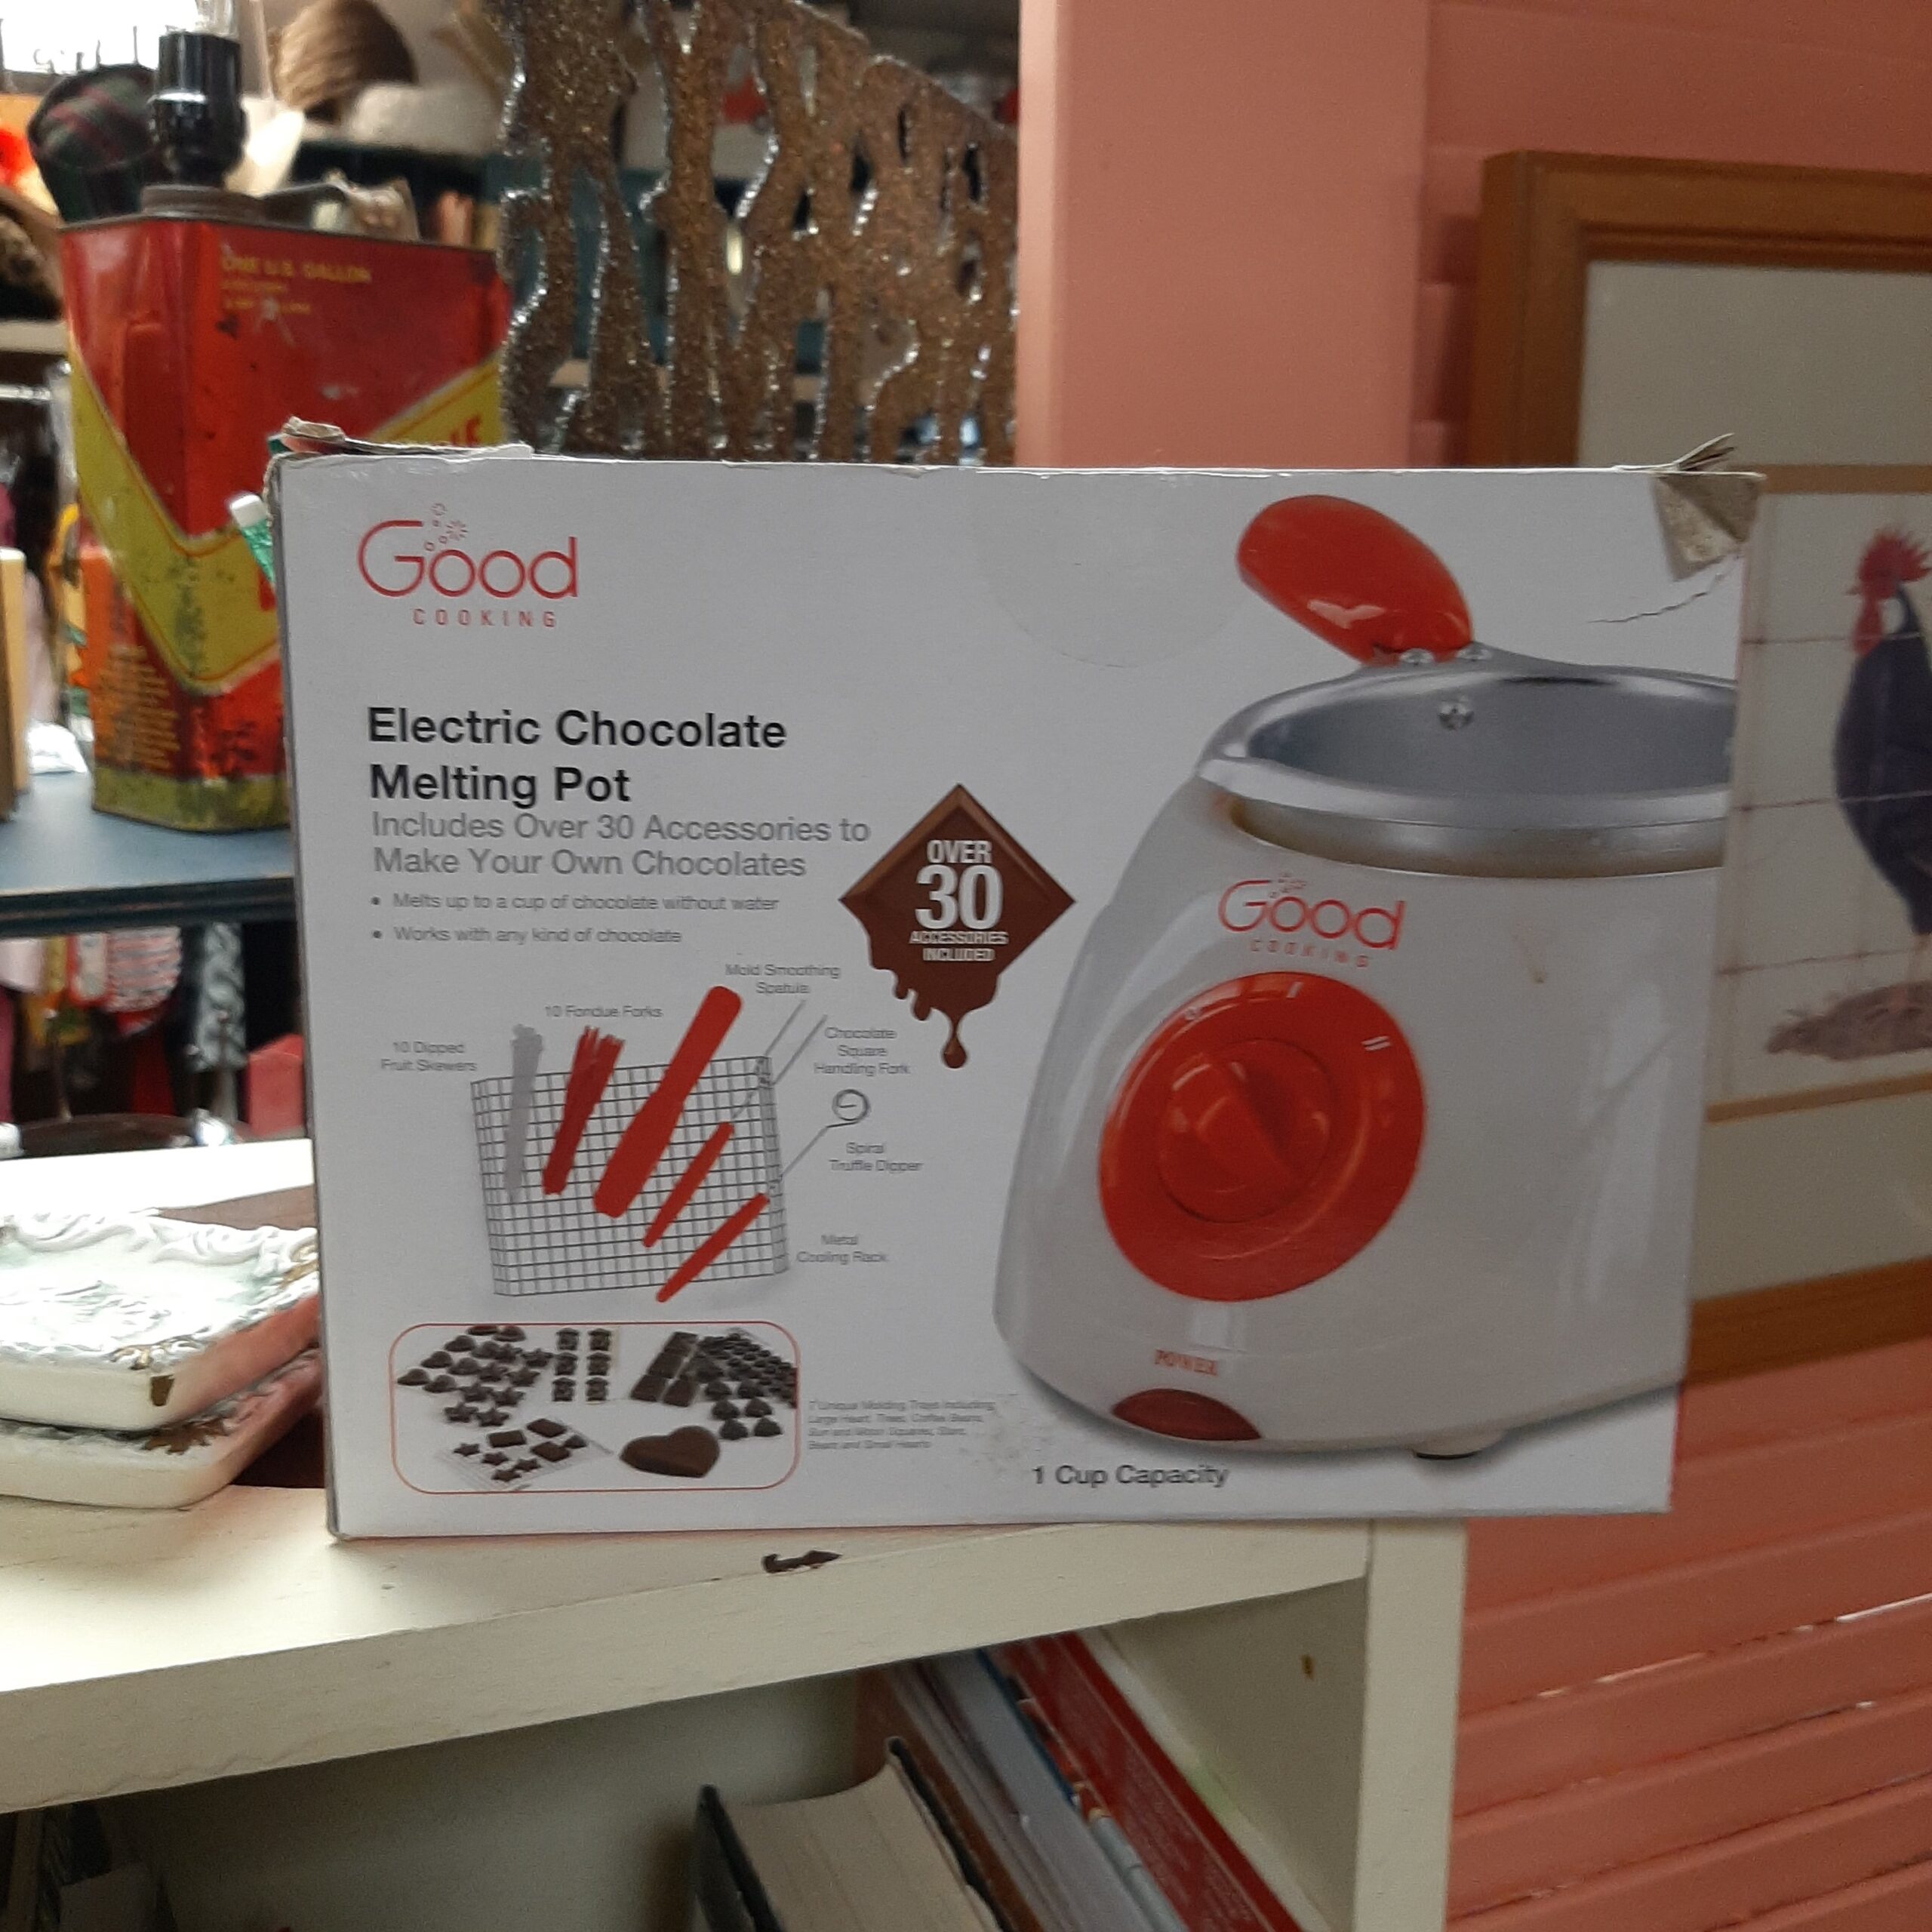 Good Cooking Electric Chocolate Melting Pot – New in Box with